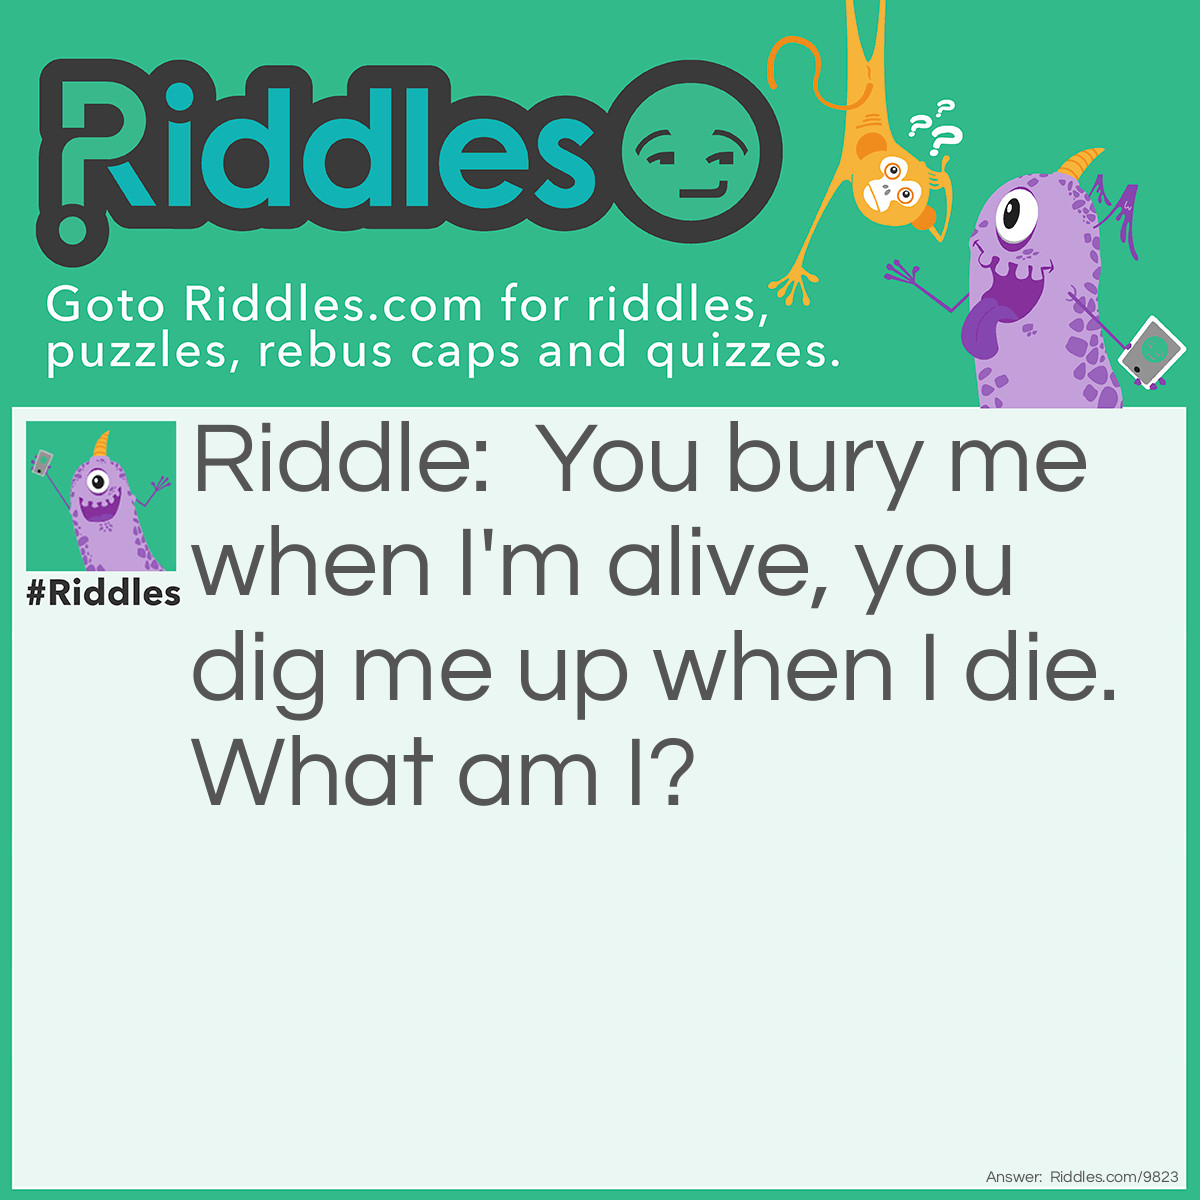 Riddle: You bury me when I'm alive, you dig me up when I die. What am I? Answer: A plant.